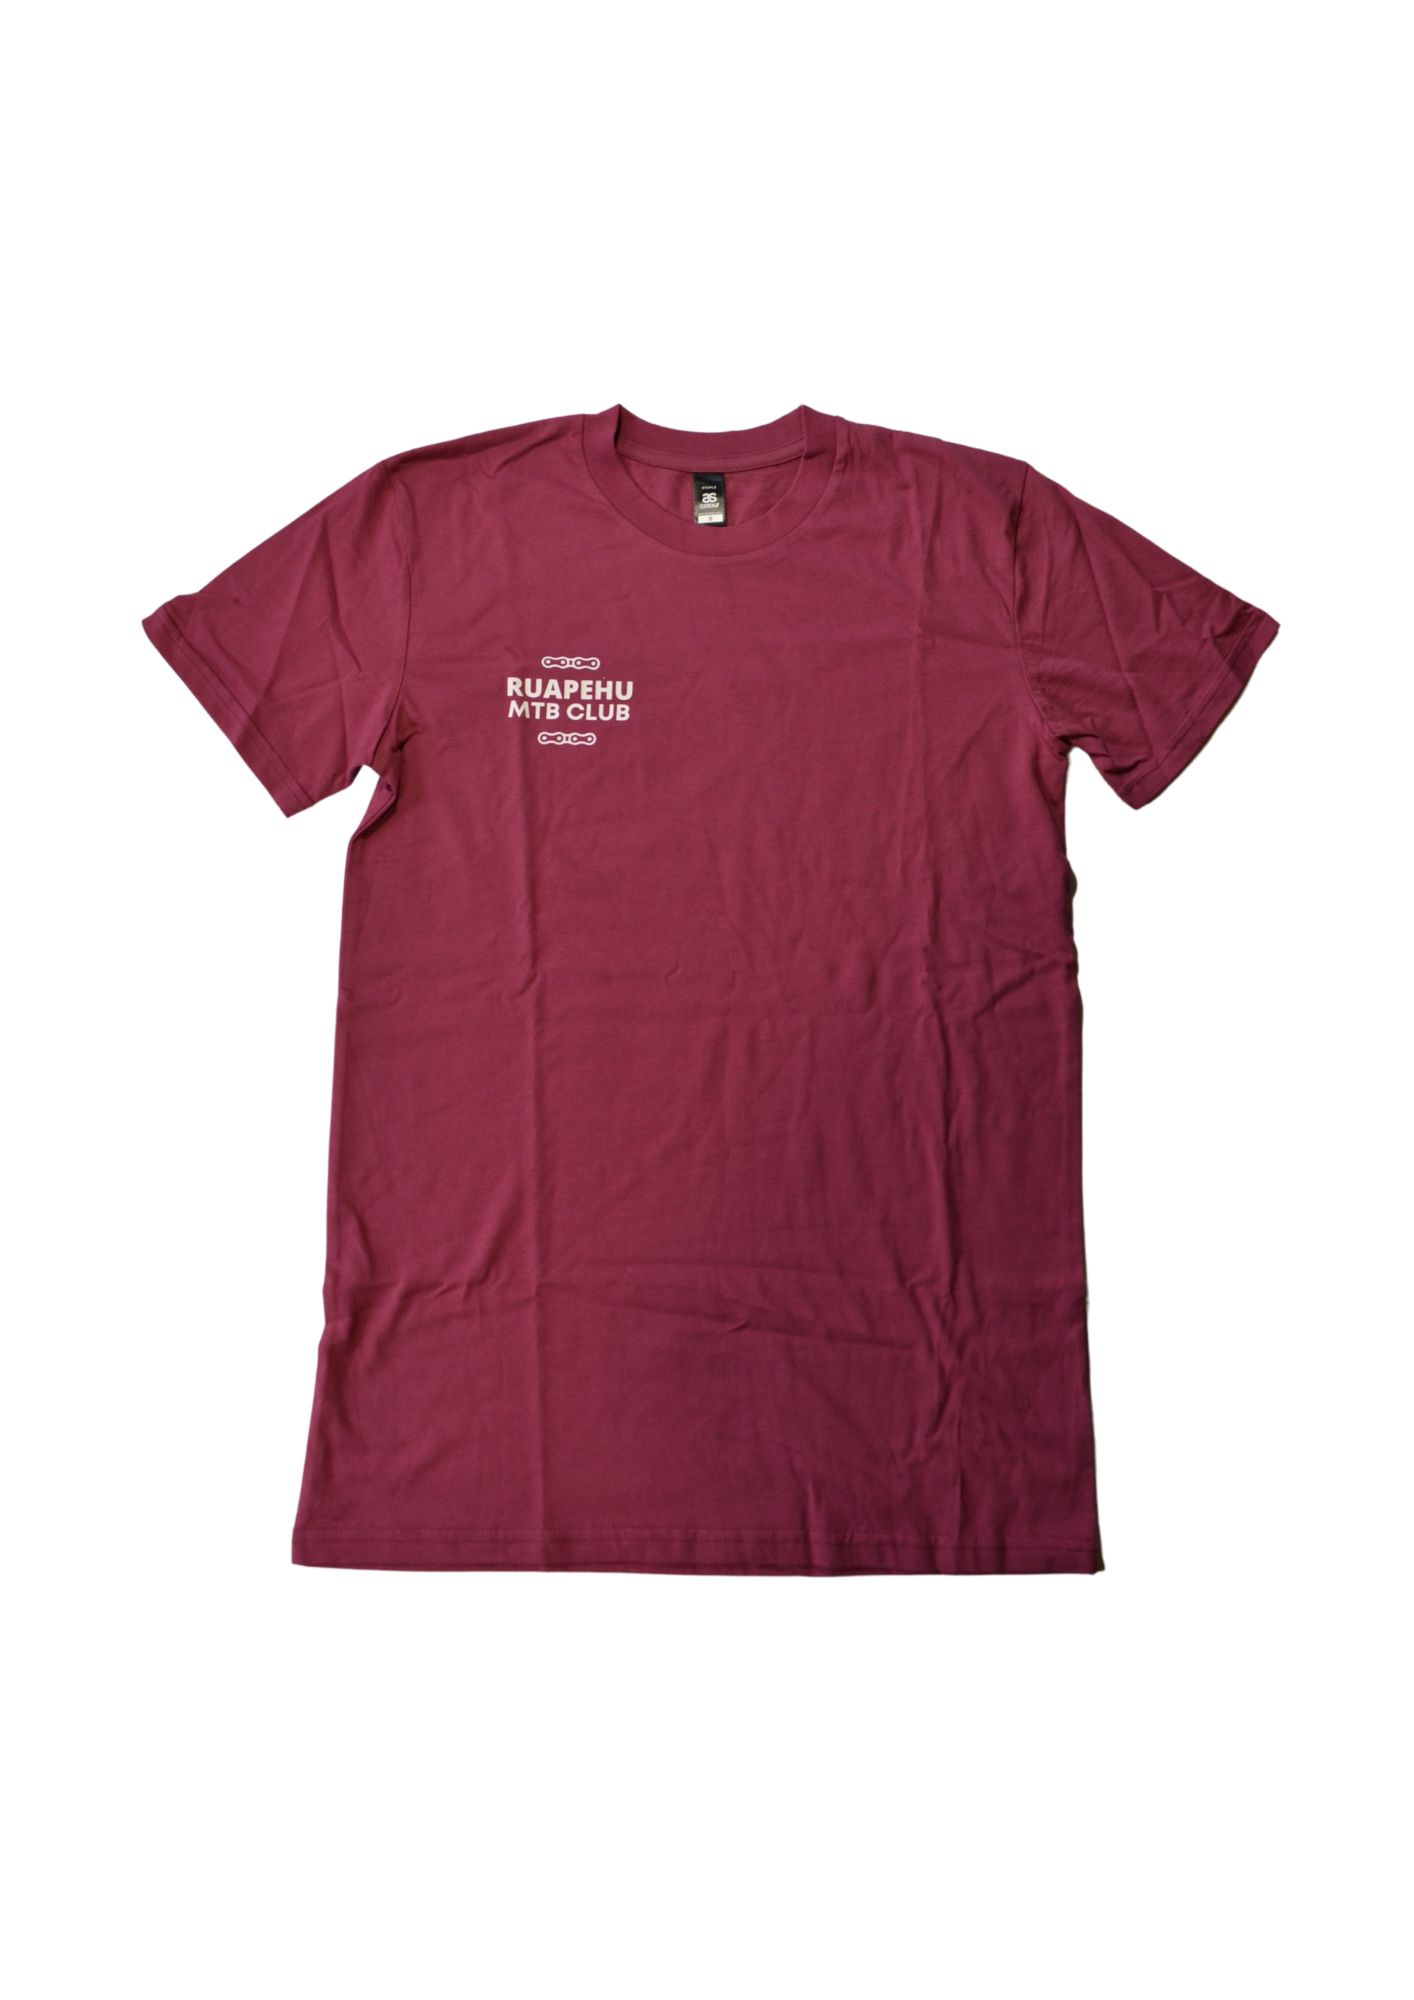 Limited Edition RMTBC T-Shirt in Berry